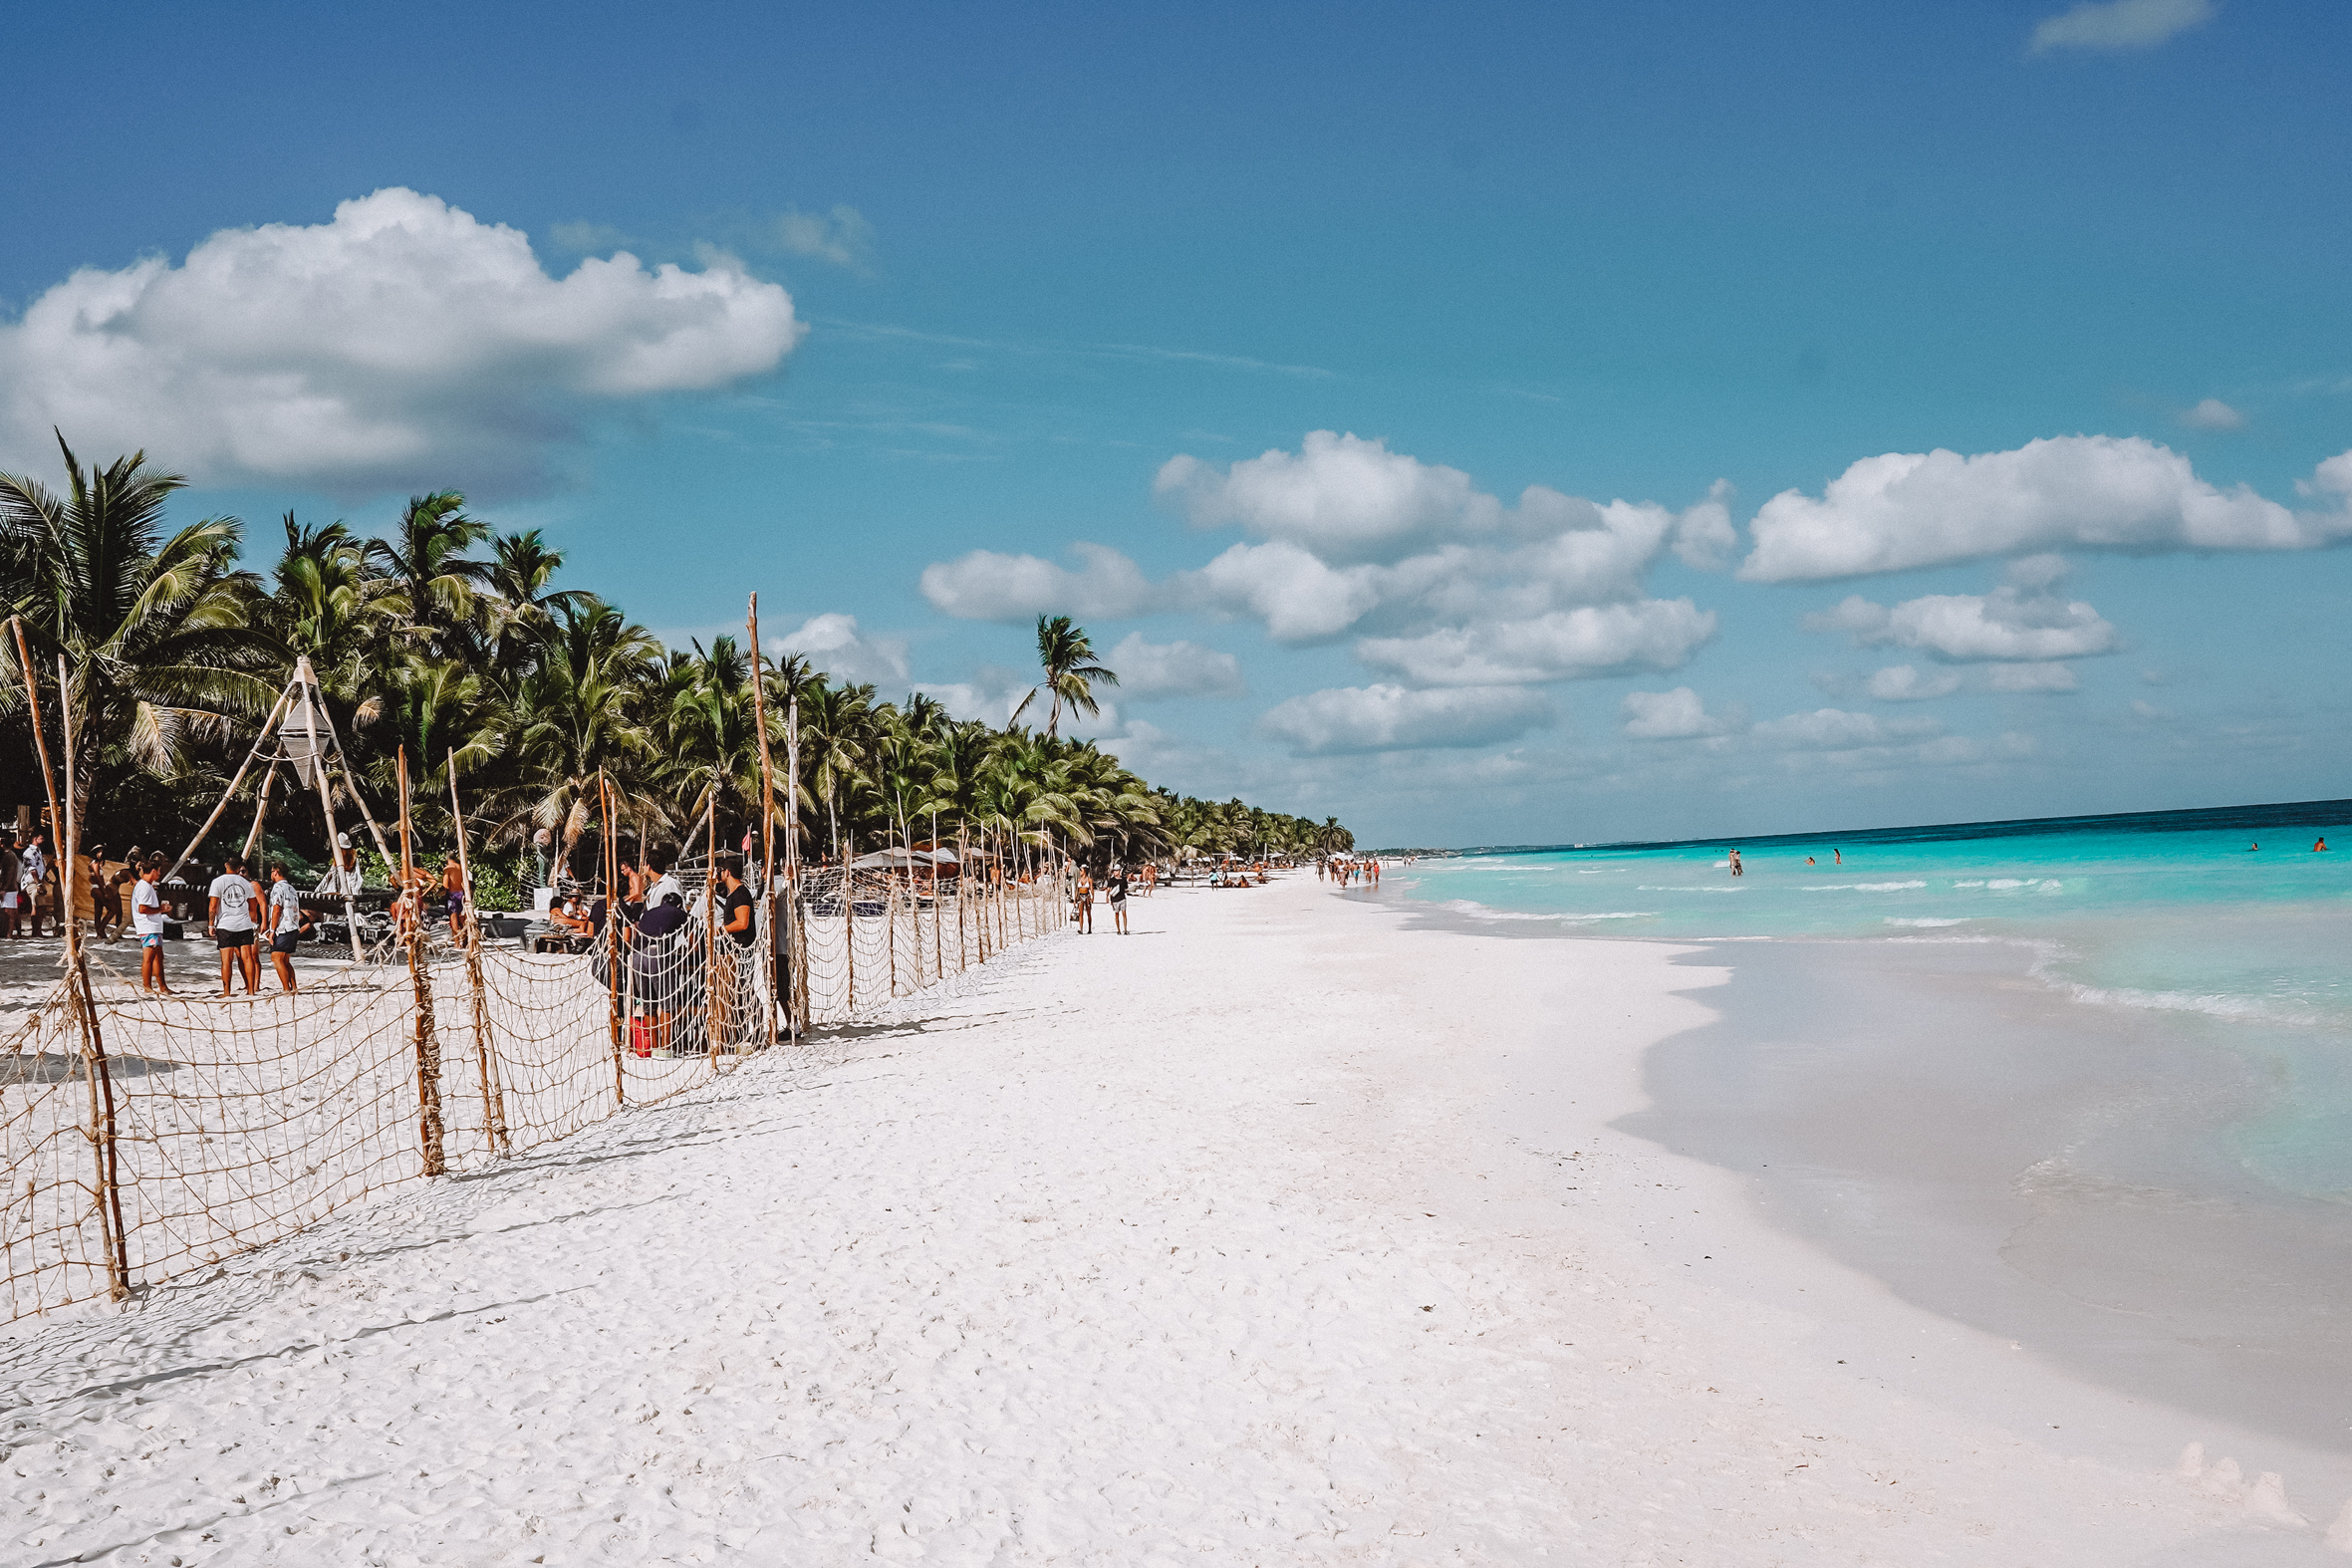 Itinerary for an unforgettable honeymoon in Tulum: where to stay & best things to do